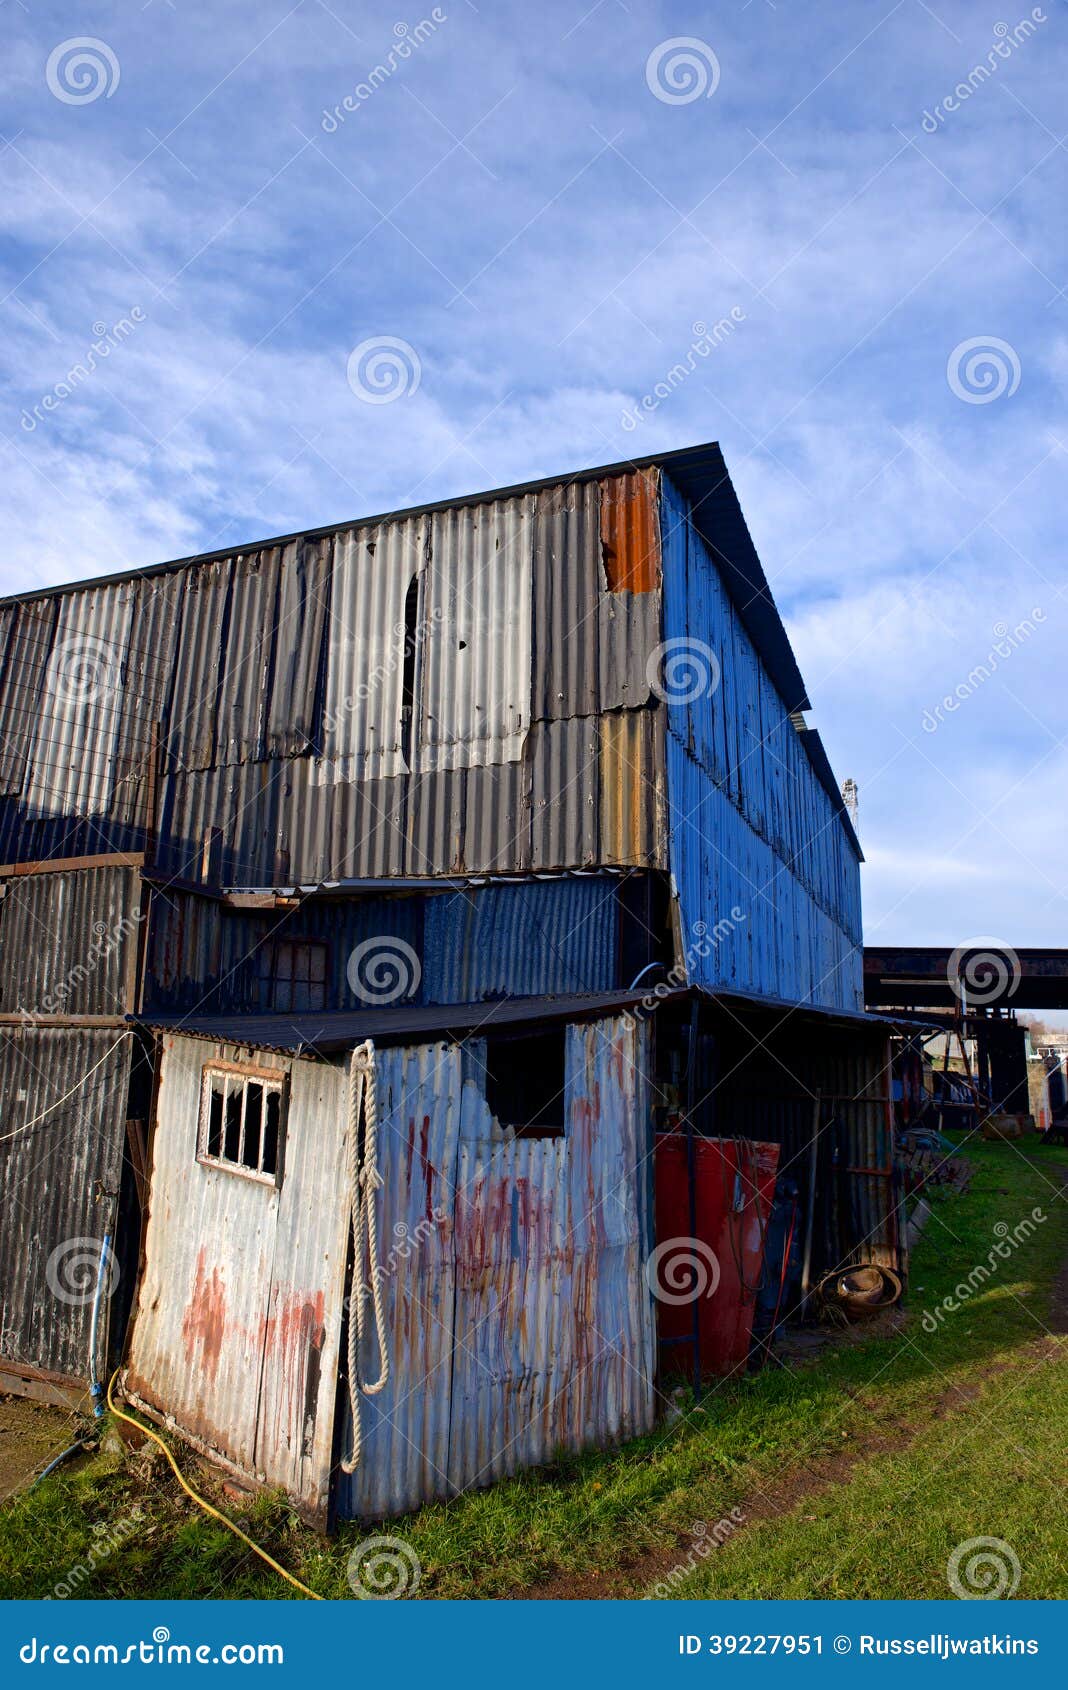 Ramshackle corrugated steel building - vertical format with copy space 